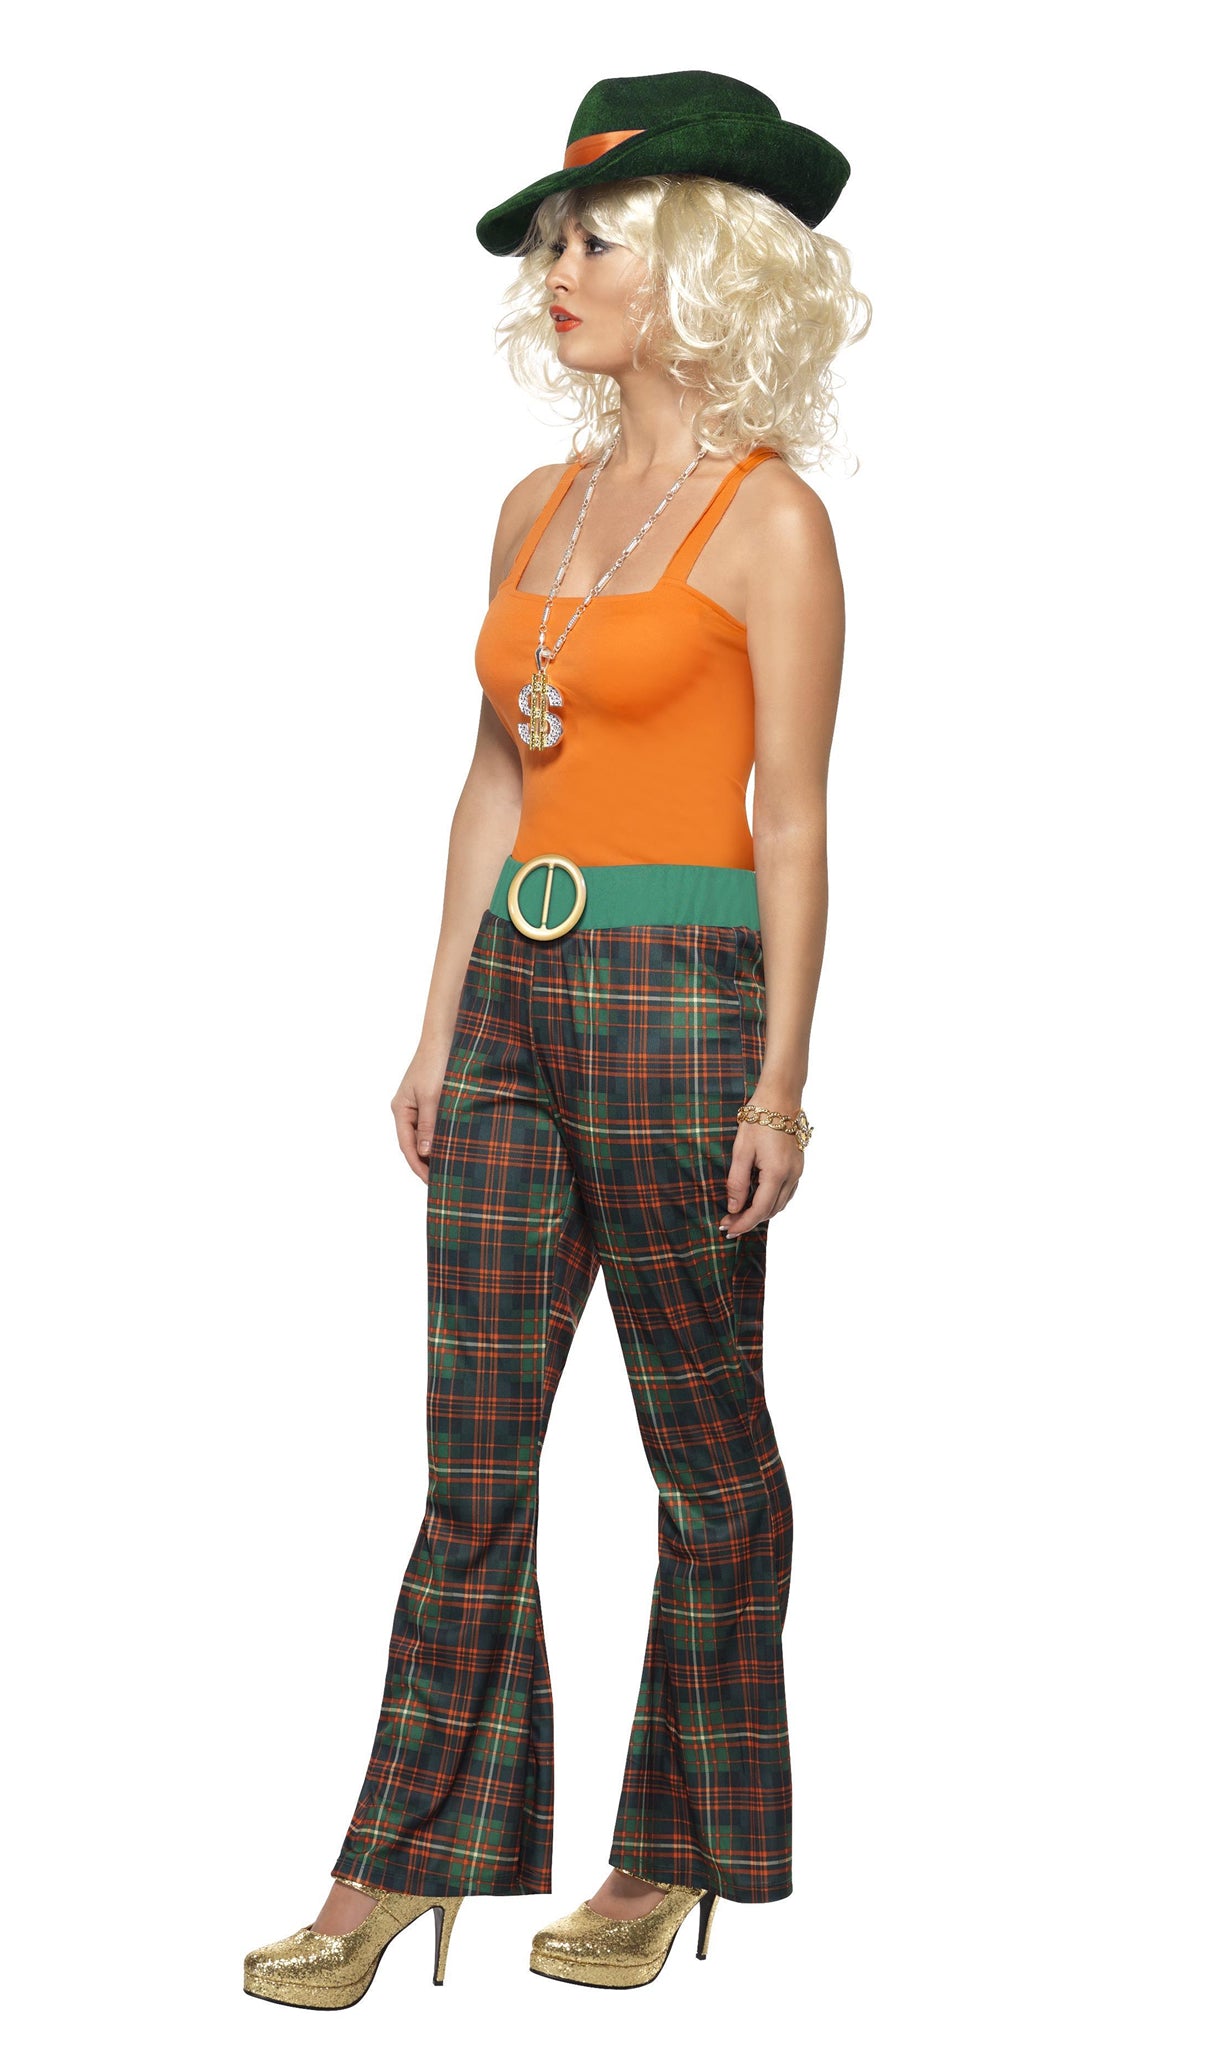 Side of woman's pimp costume with orange top, tartan pants and green belt